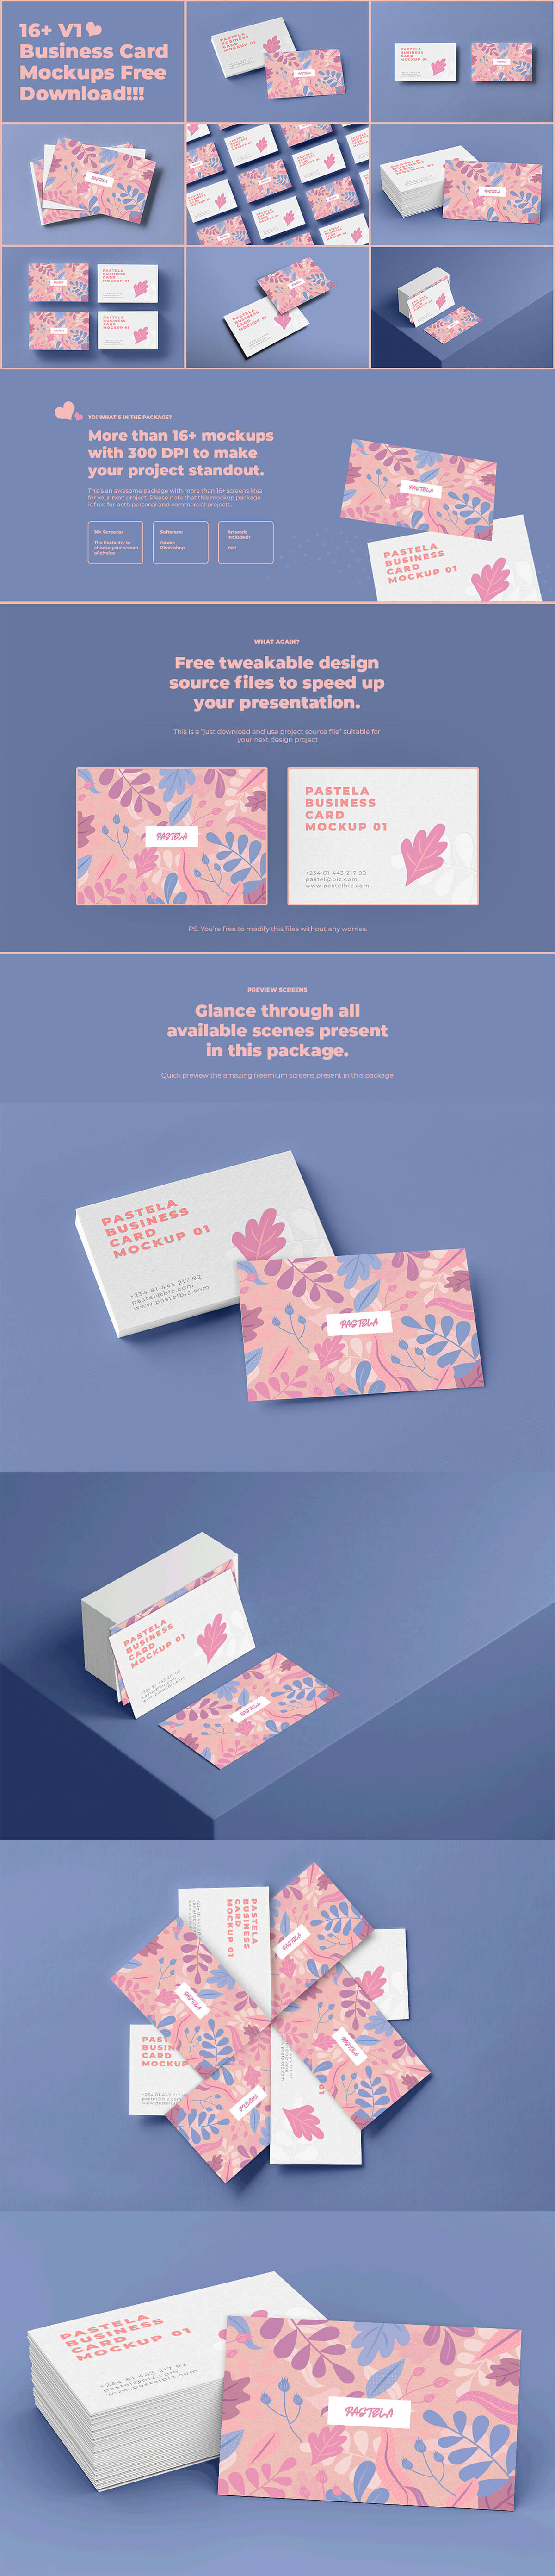 Free Business Card Mockup Collection V1